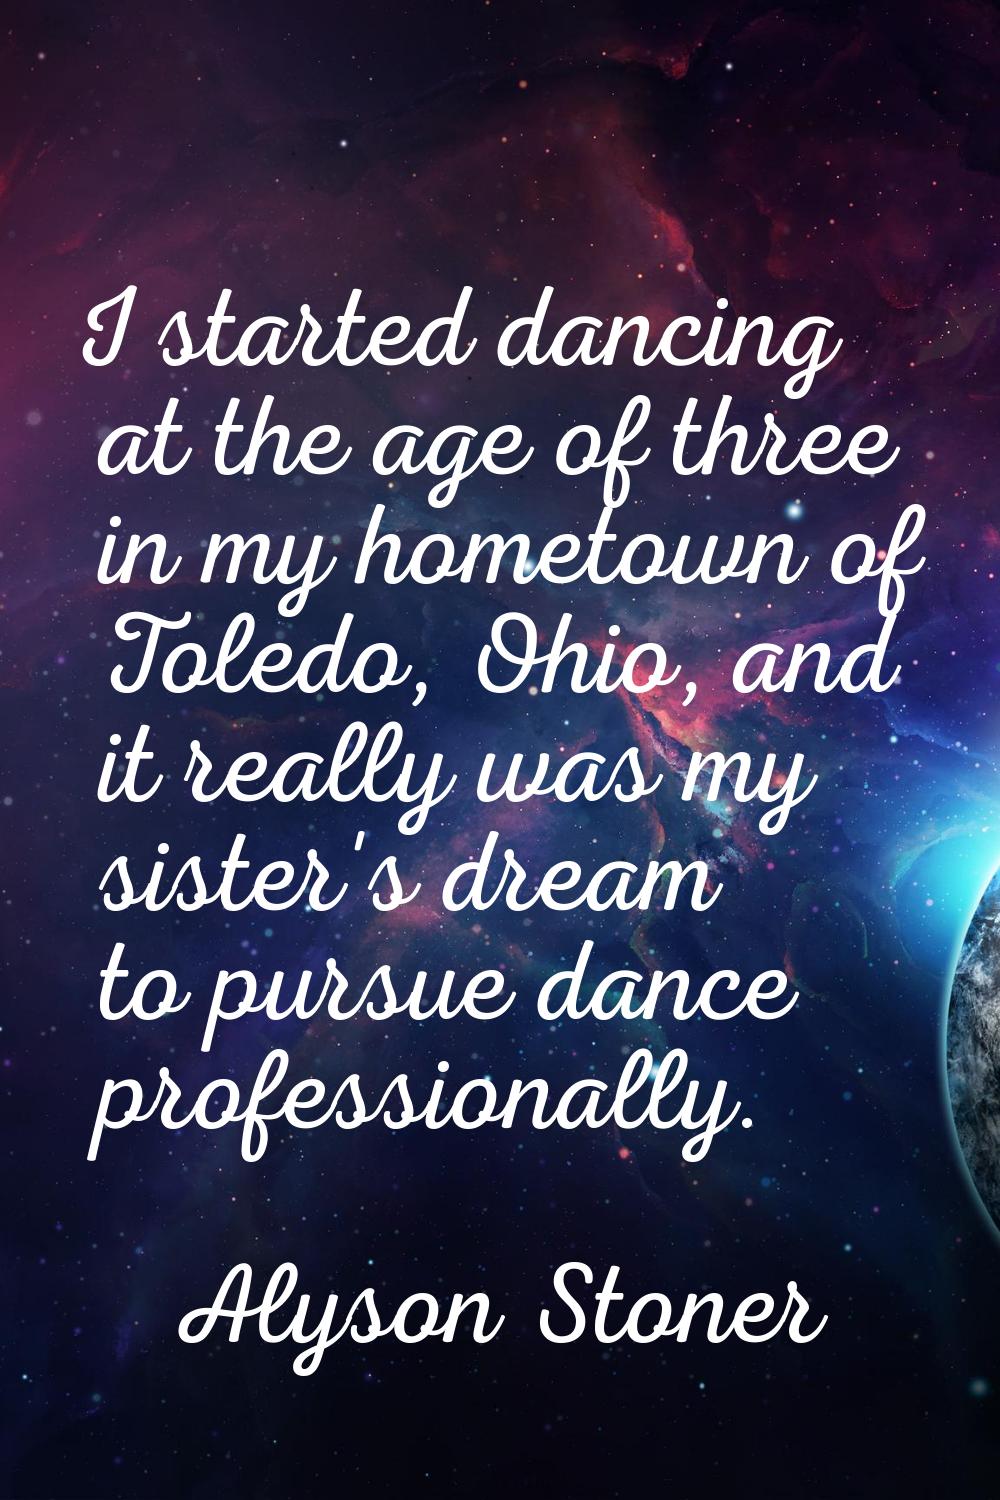 I started dancing at the age of three in my hometown of Toledo, Ohio, and it really was my sister's